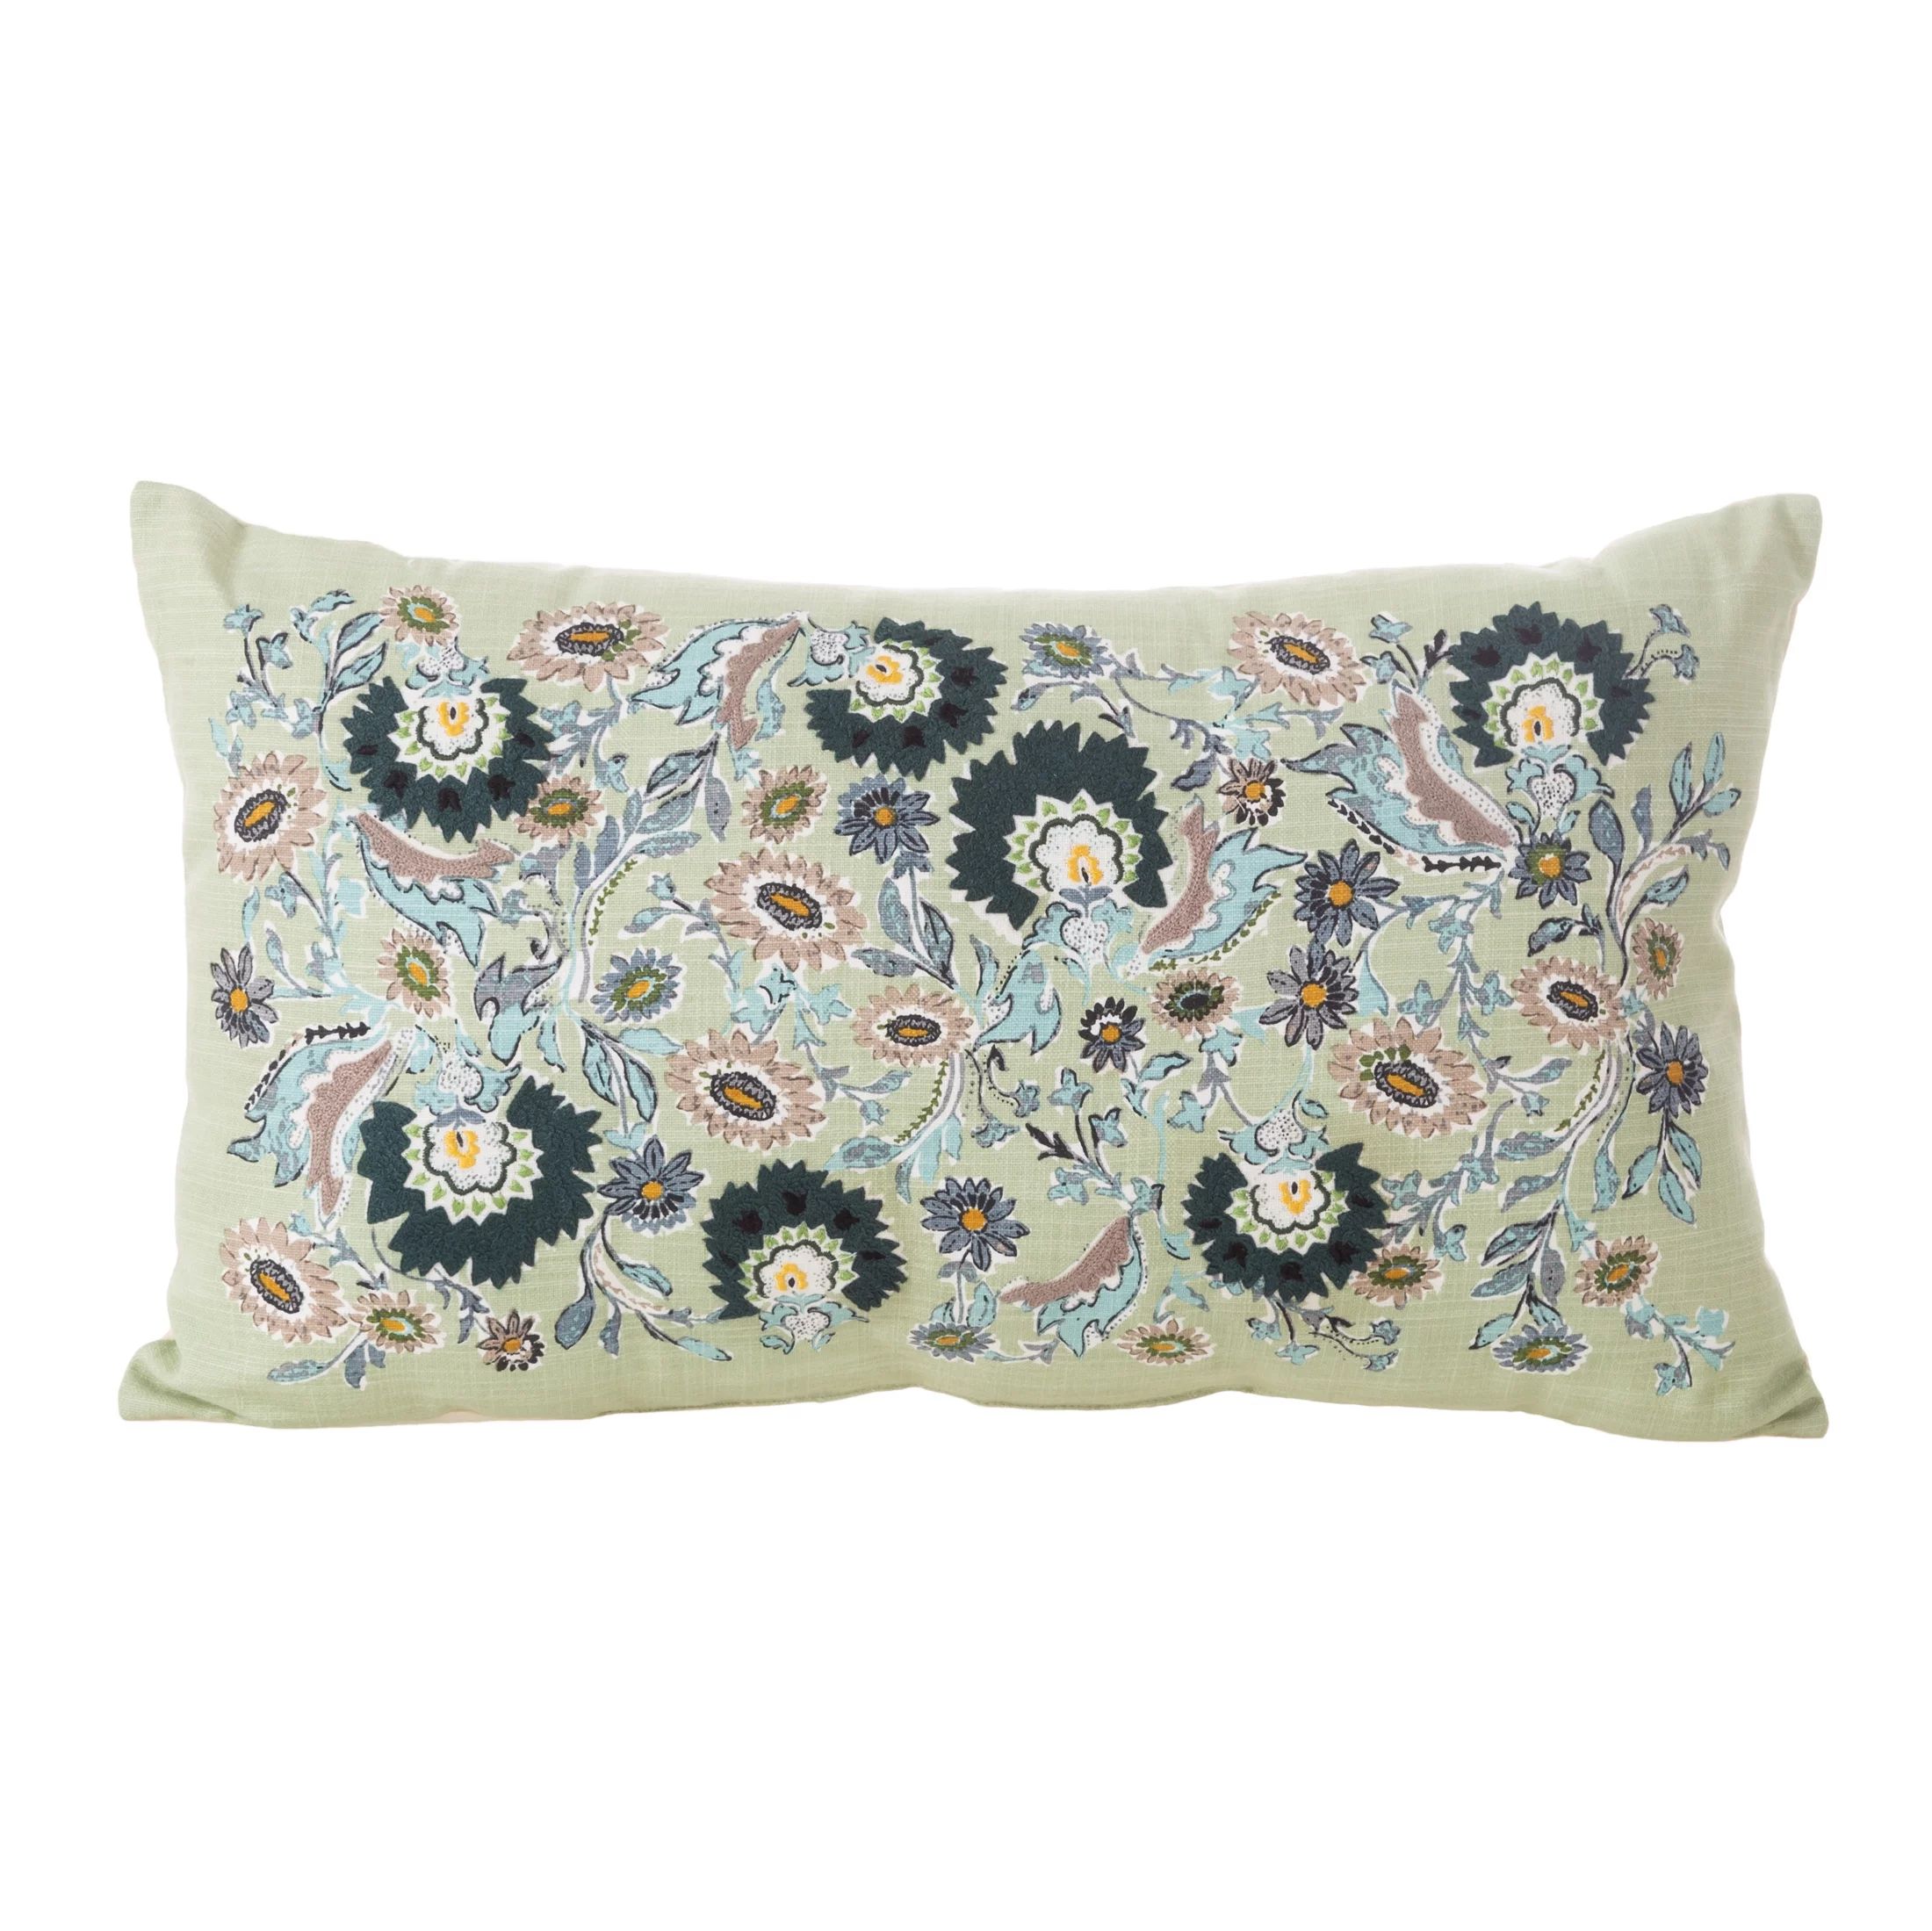 Beautiful Decorative Pillow 14”x24” Floral Paisley by Drew Barrymore | Walmart (US)